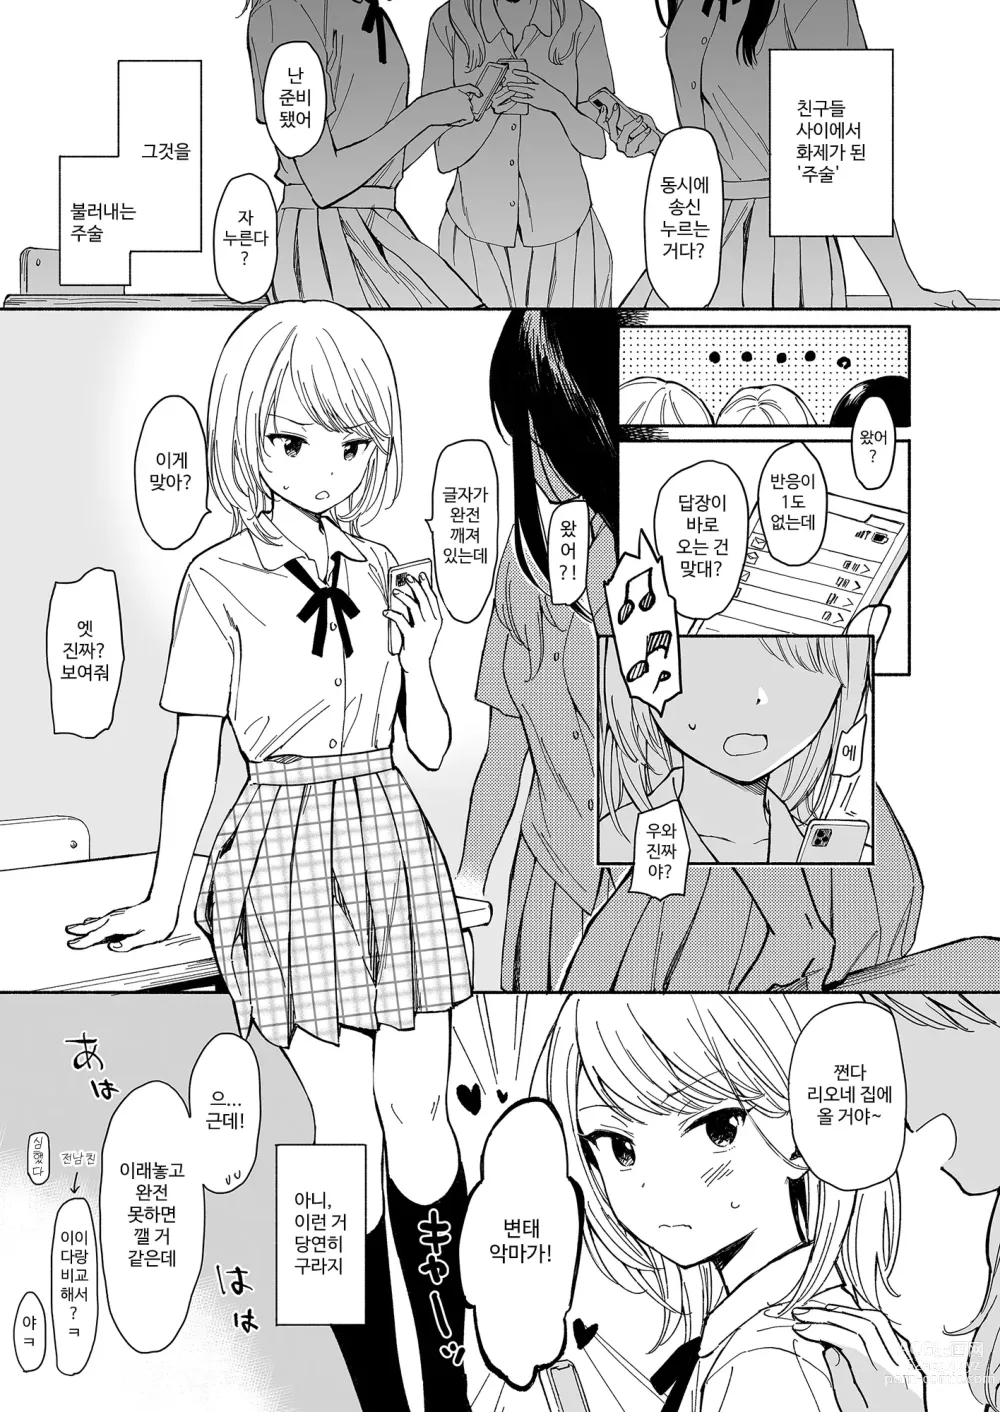 Page 29 of doujinshi 심야의 침입자